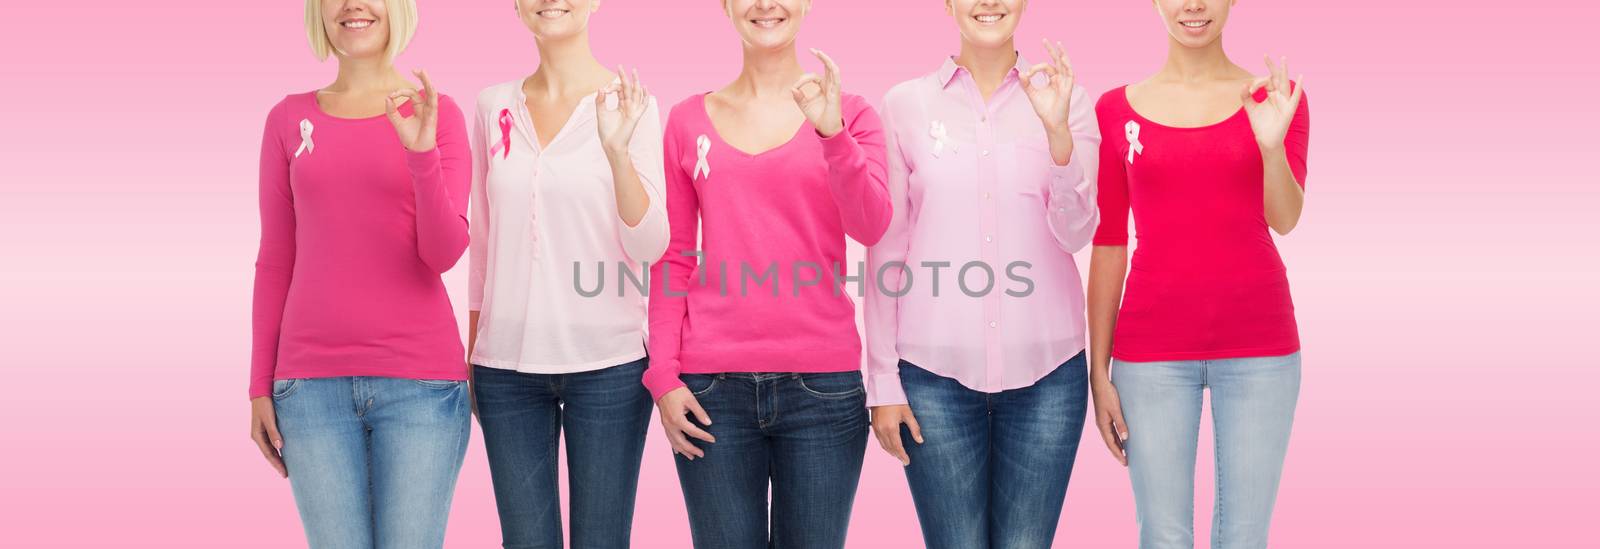 healthcare, people, gesture and medicine concept - close up of smiling women in blank shirts with breast cancer awareness ribbons showing ok sign over pink background